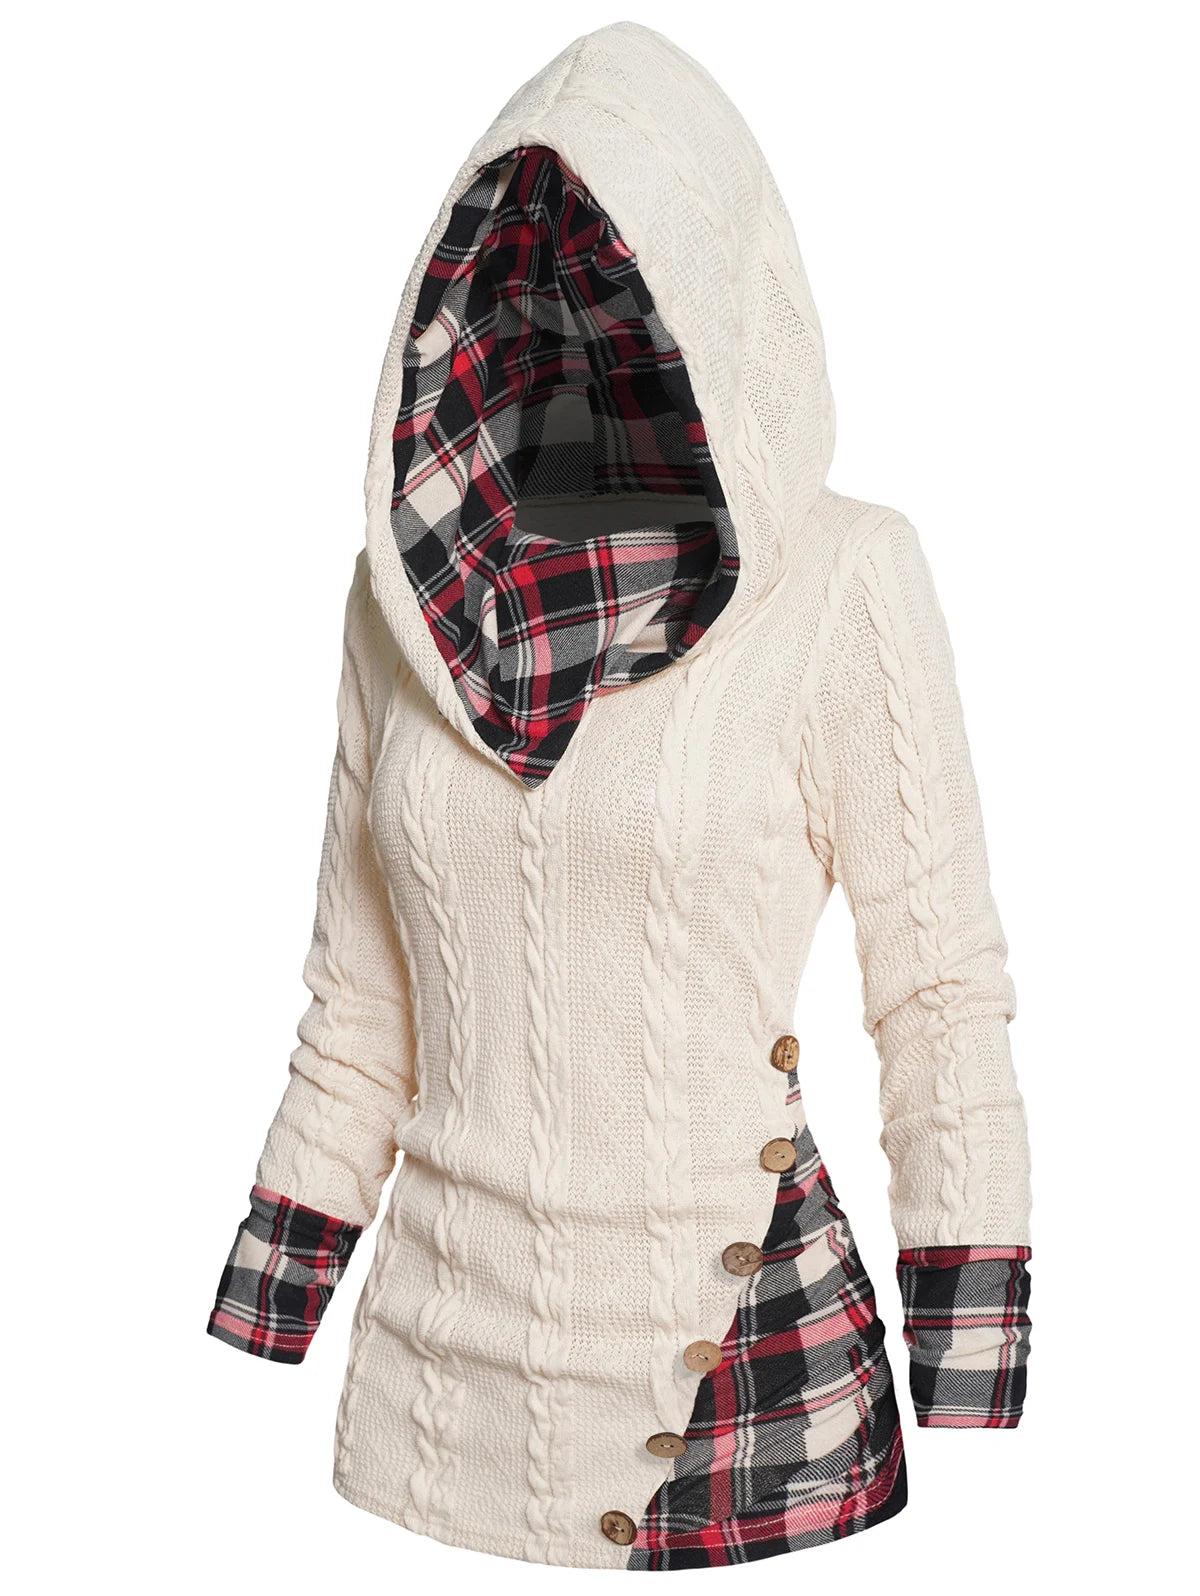 Plaid Textured Knit Hooded Top